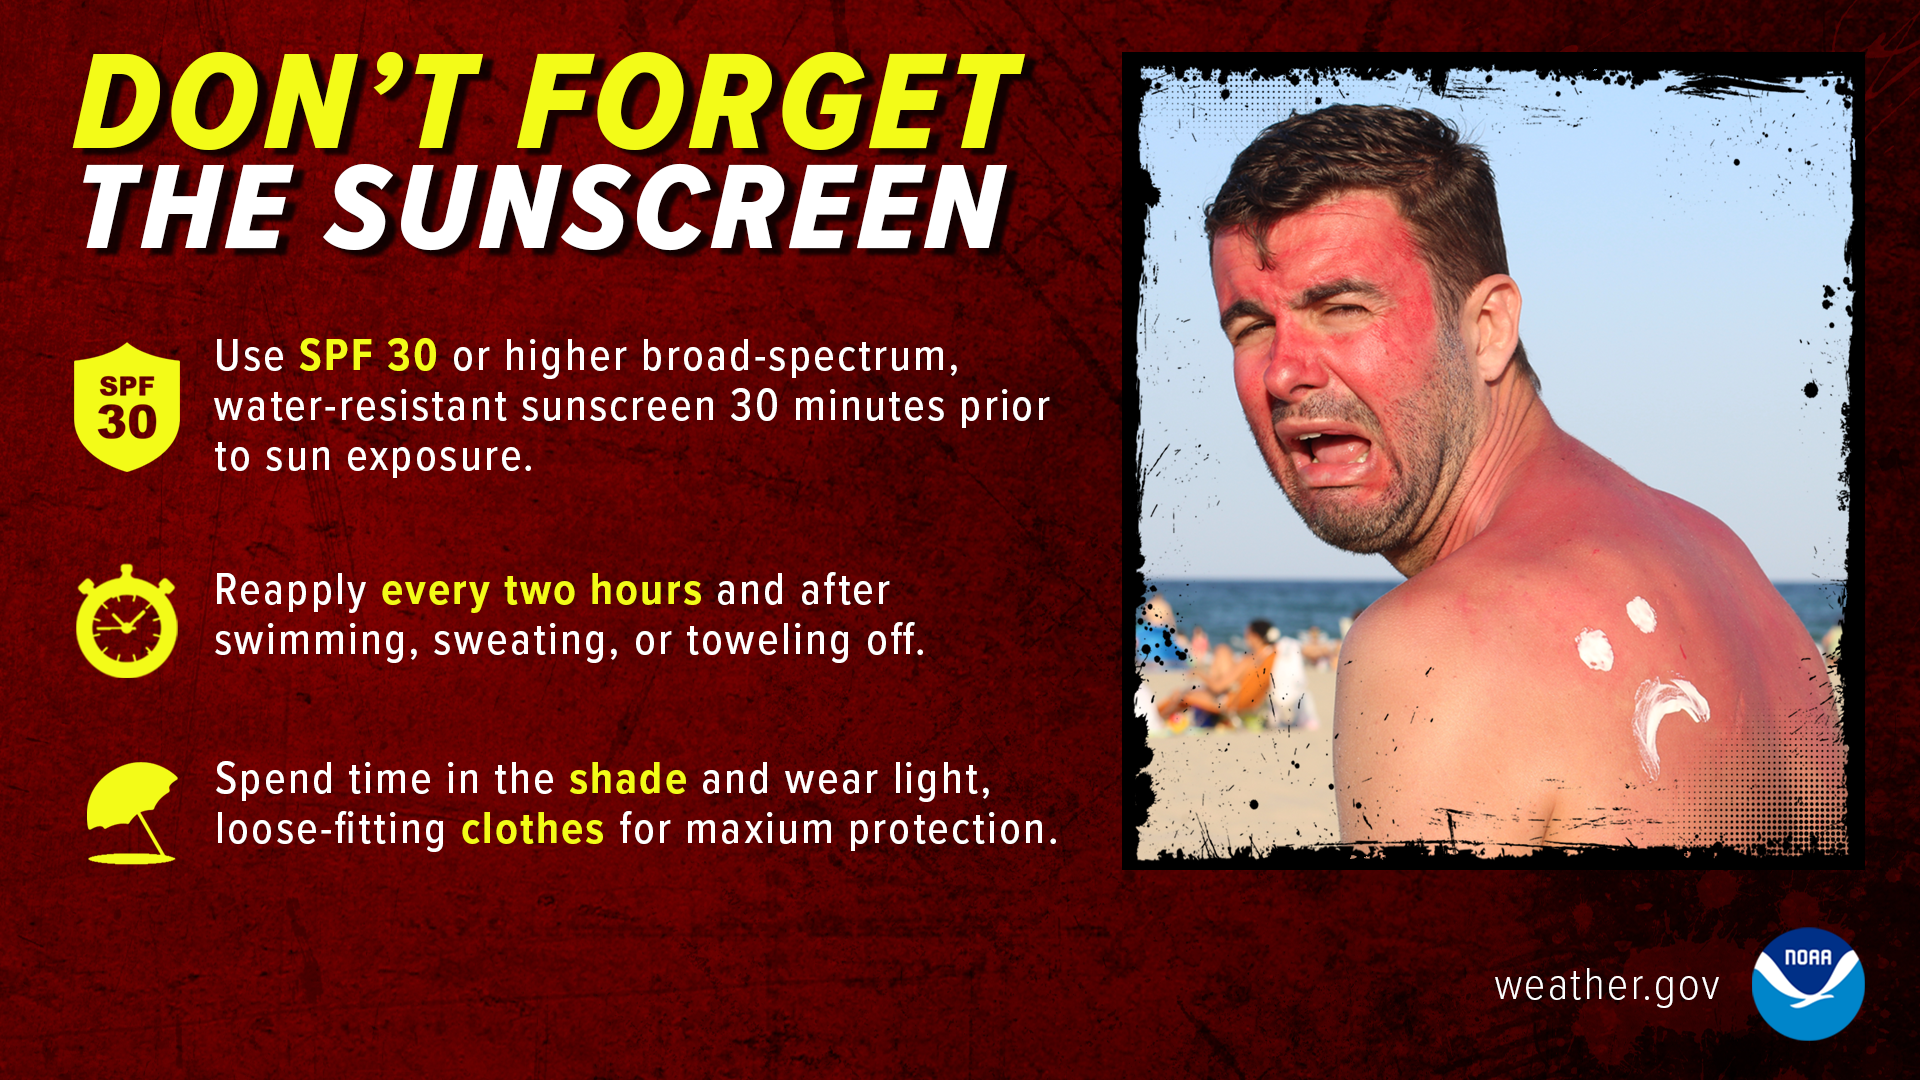 Don't forget the sunscreen! Use SPF 30 or higher broad-spectrum, water-resistant sunscreen 30 minutes prior to sun exposure. Reapply every two hours and after swimming, sweating, or toweling off. Spend time in the shade and wear light, loose-fitting clothes for maximum protection.